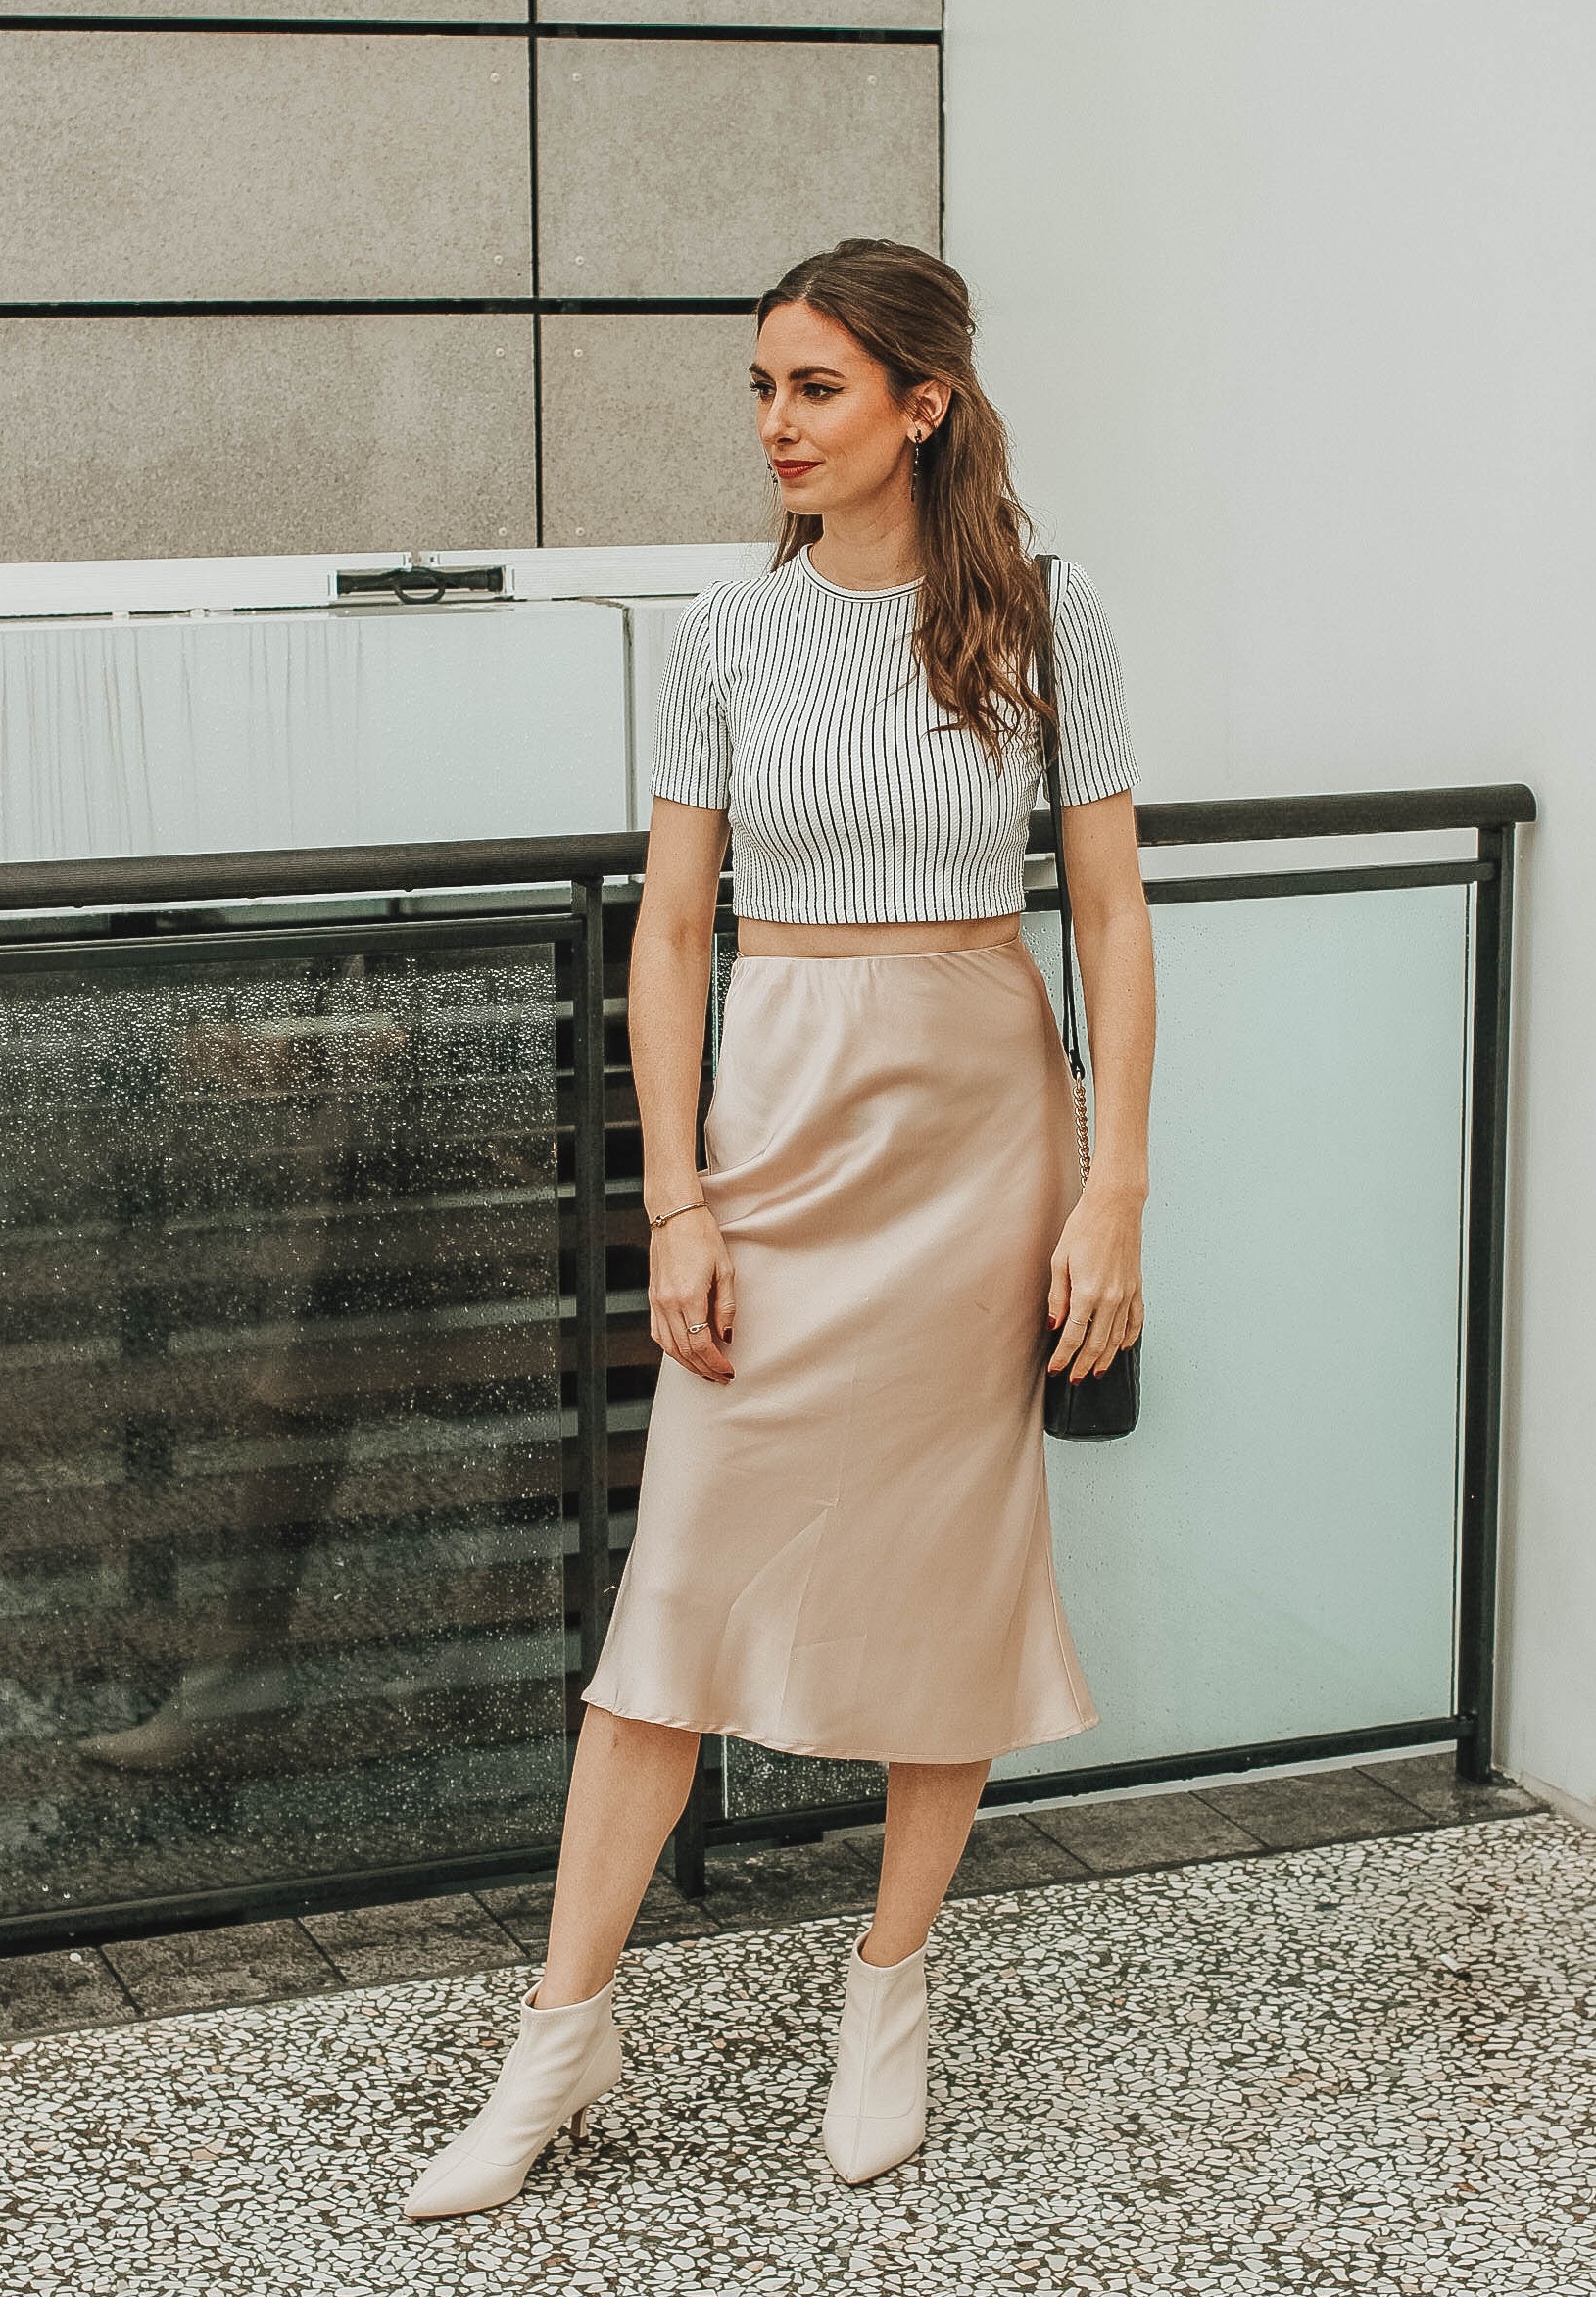 The Slip Skirt Trend Is the Most Elegant of Them All